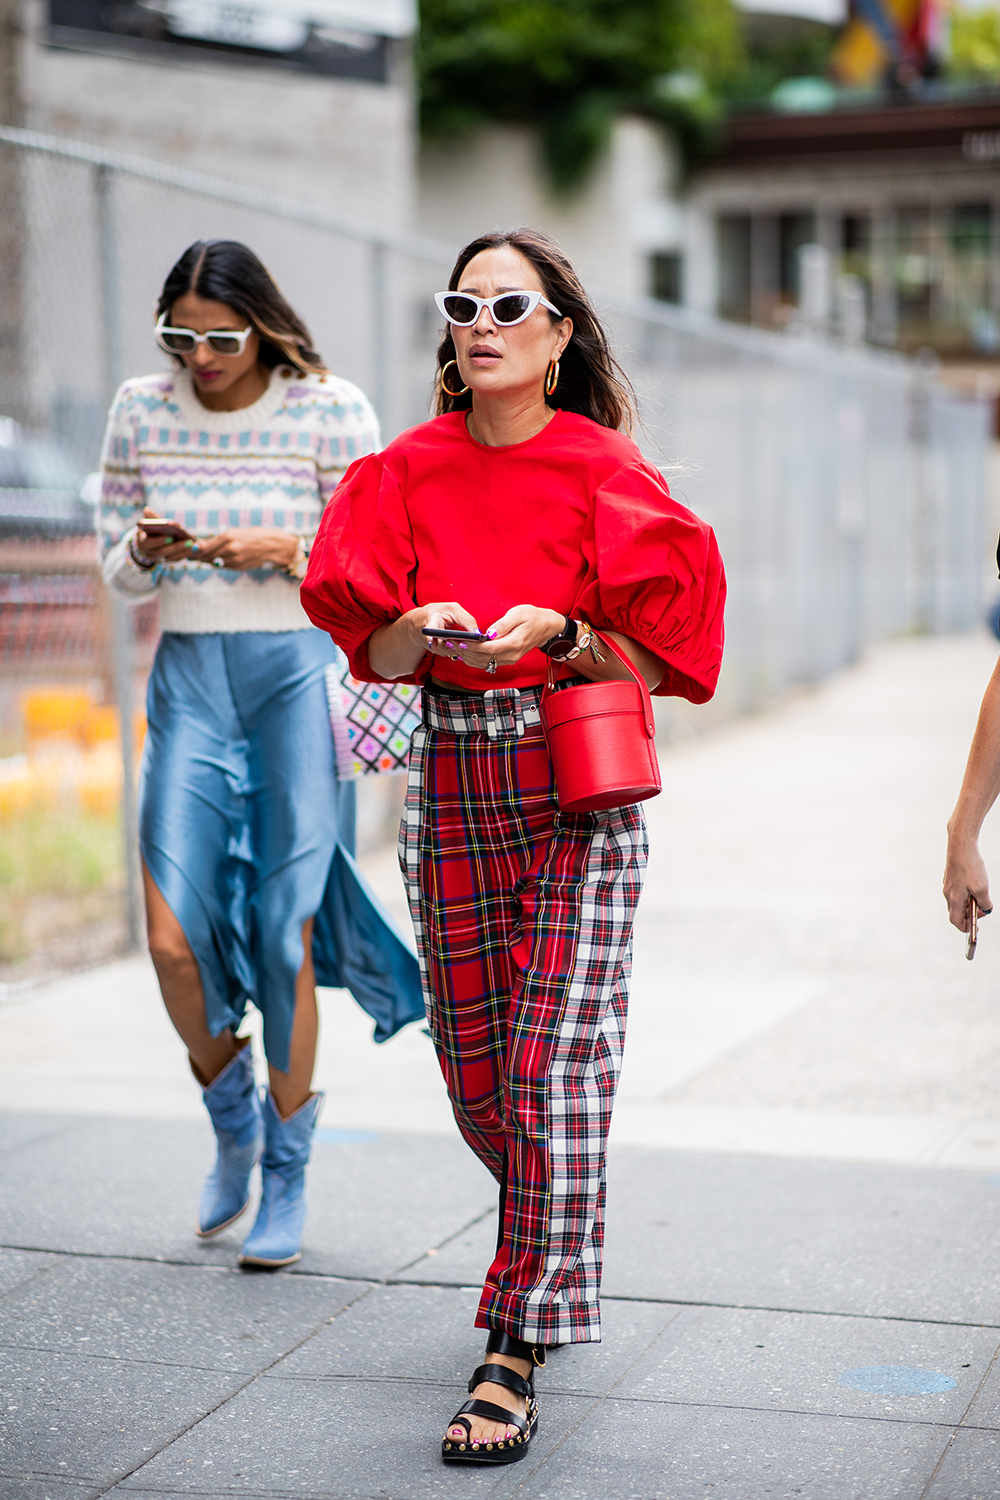 NEW YORK, NY - SEPTEMBER 08: A guest wearing ruffled top, checked pants is seen outside Dion Lee during New York Fashion Week Spring/Summer 2019 on September 8, 2018 in New York City. (Photo by Christian Vierig/Getty Images)